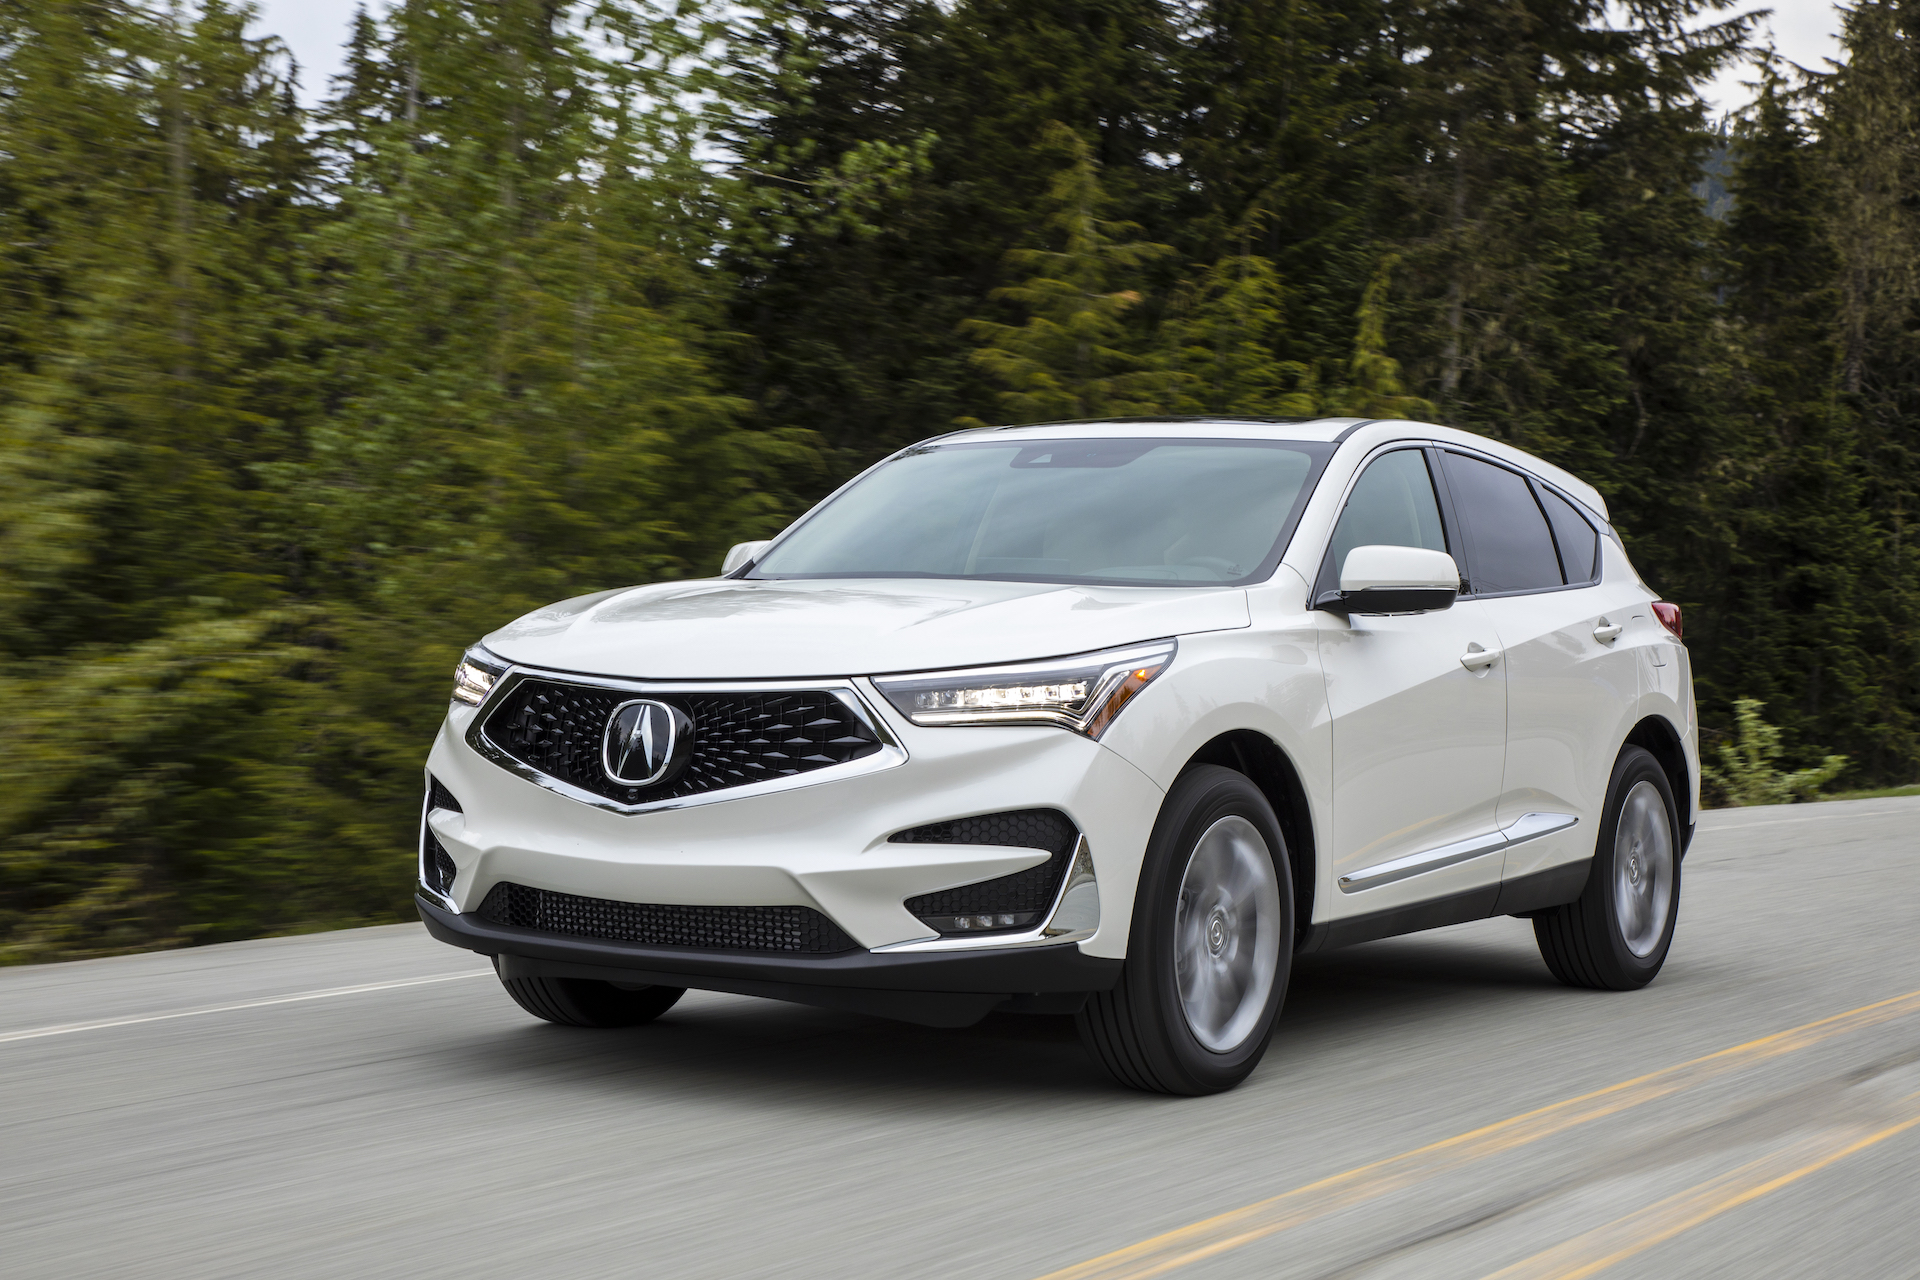 2019 Acura Rdx Review Ratings Specs Prices And Photos The Car Connection